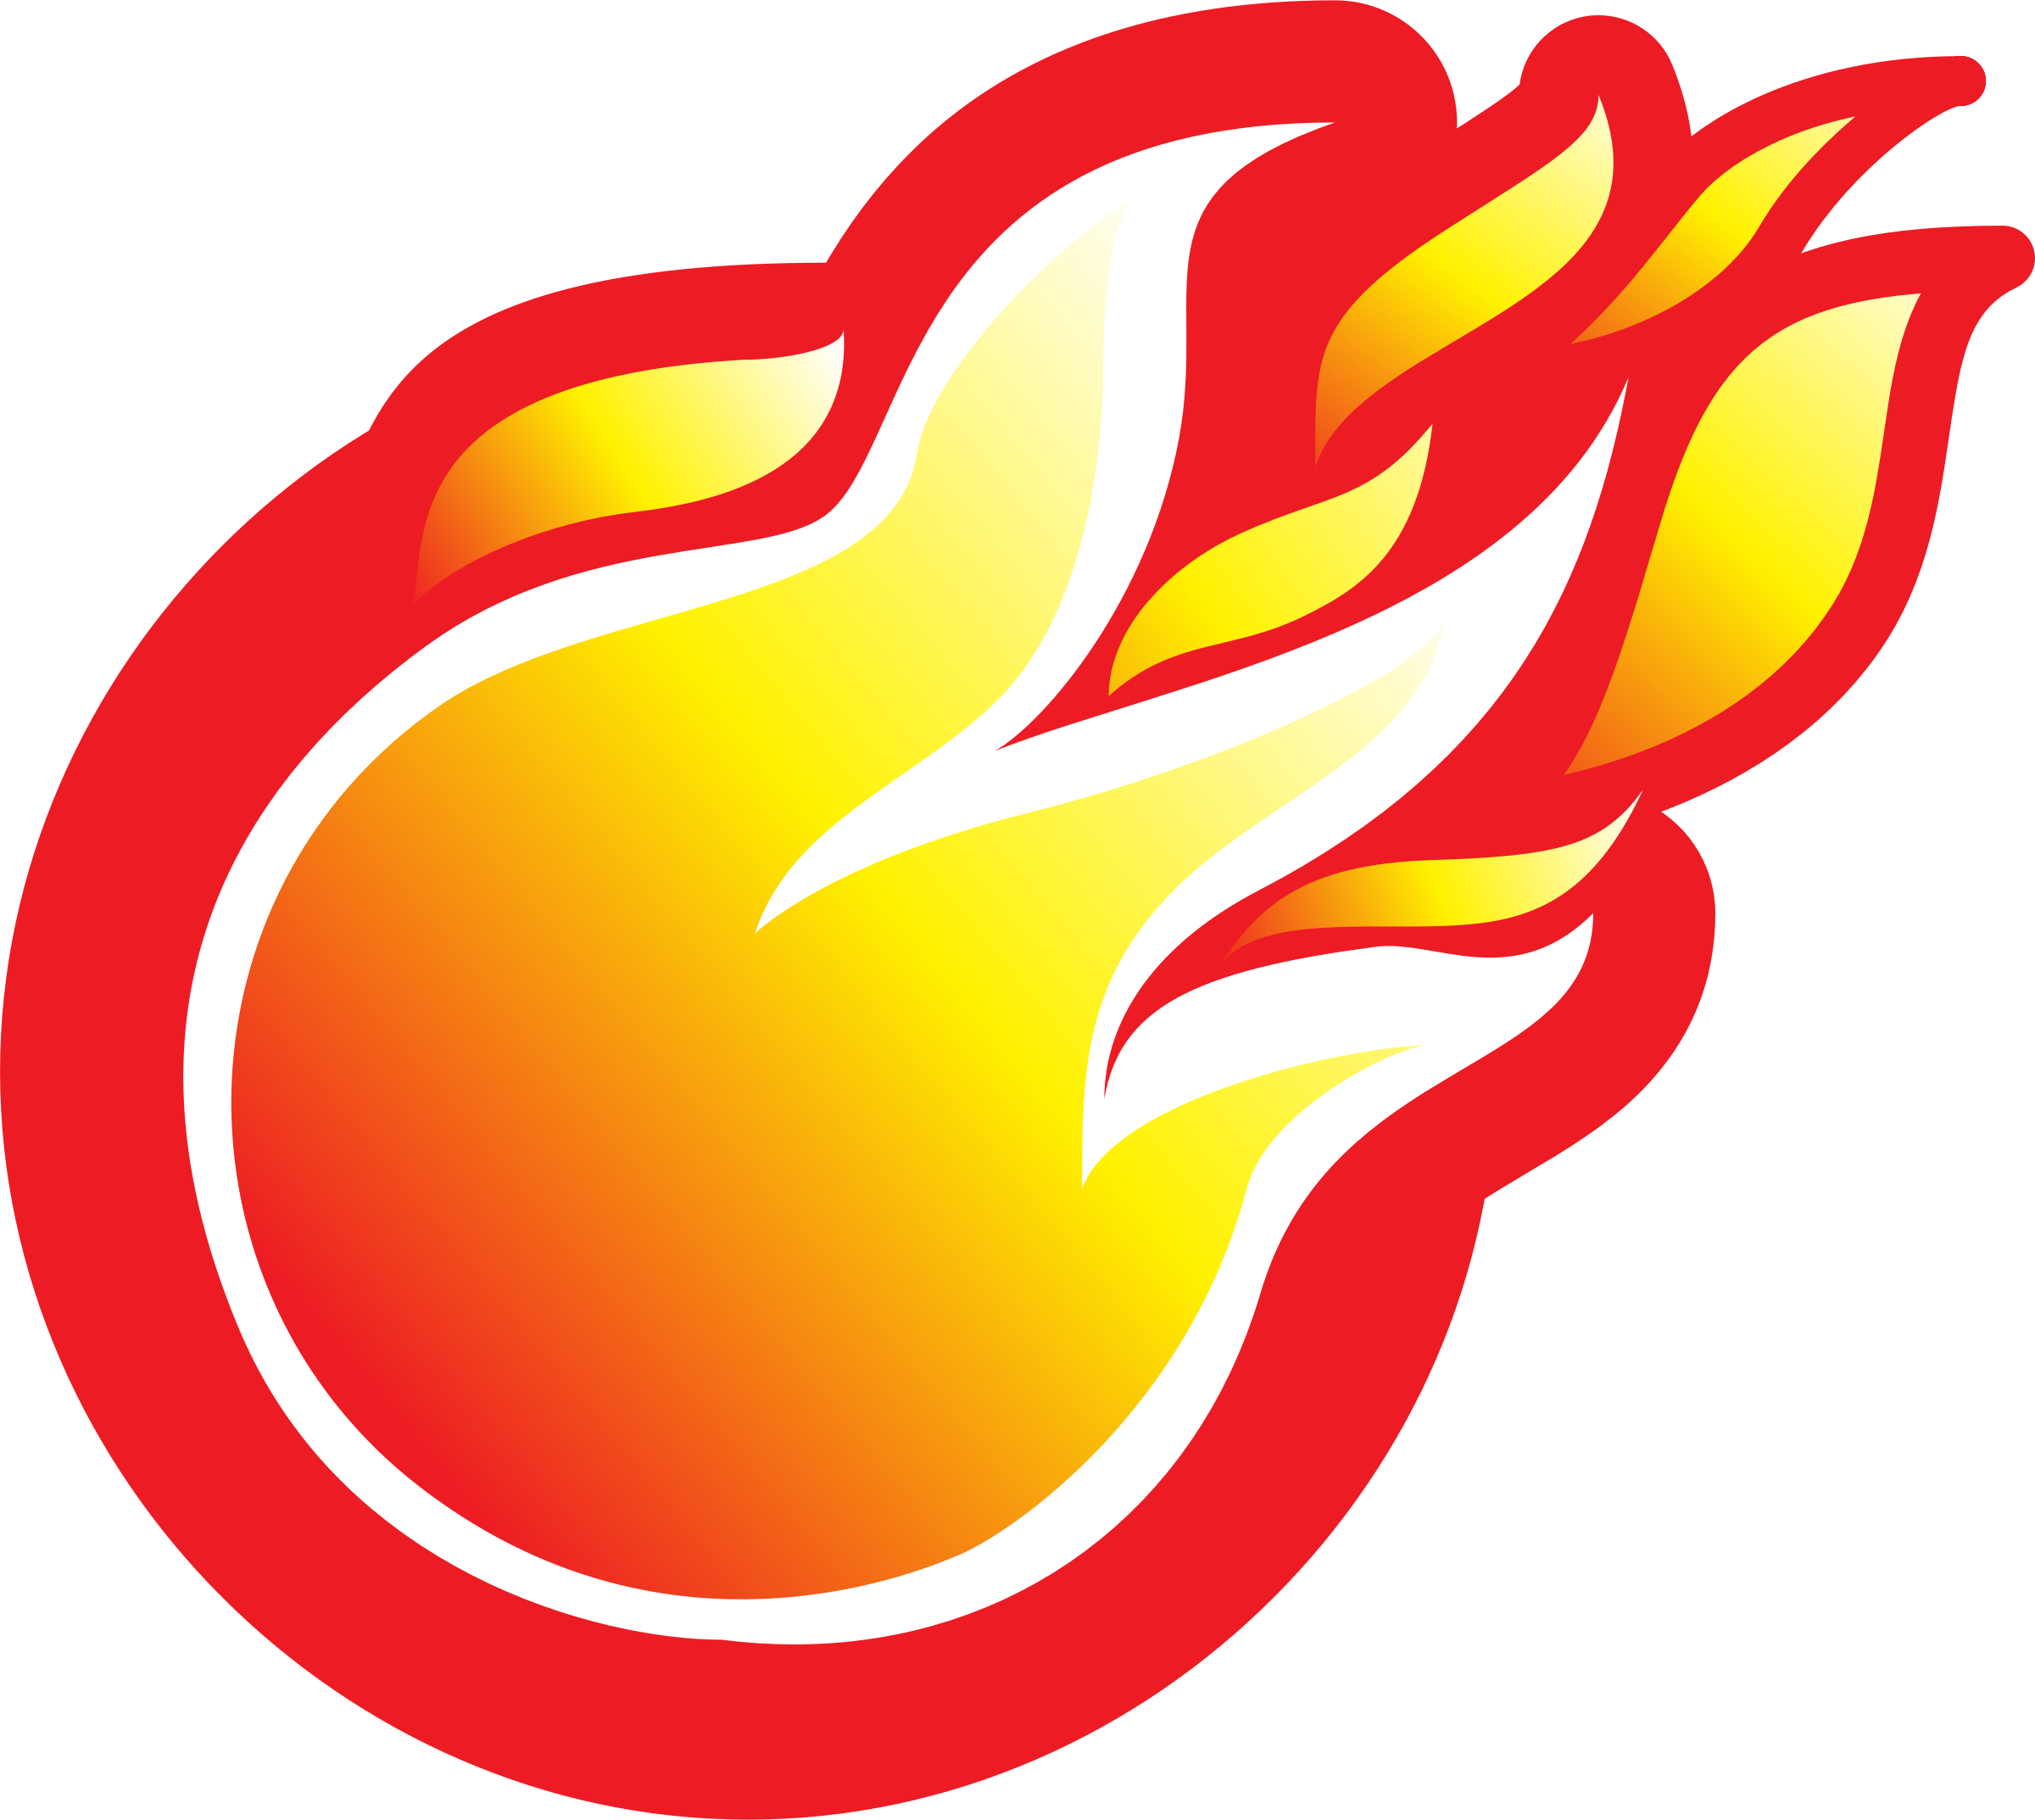 Flame fire icon clipart